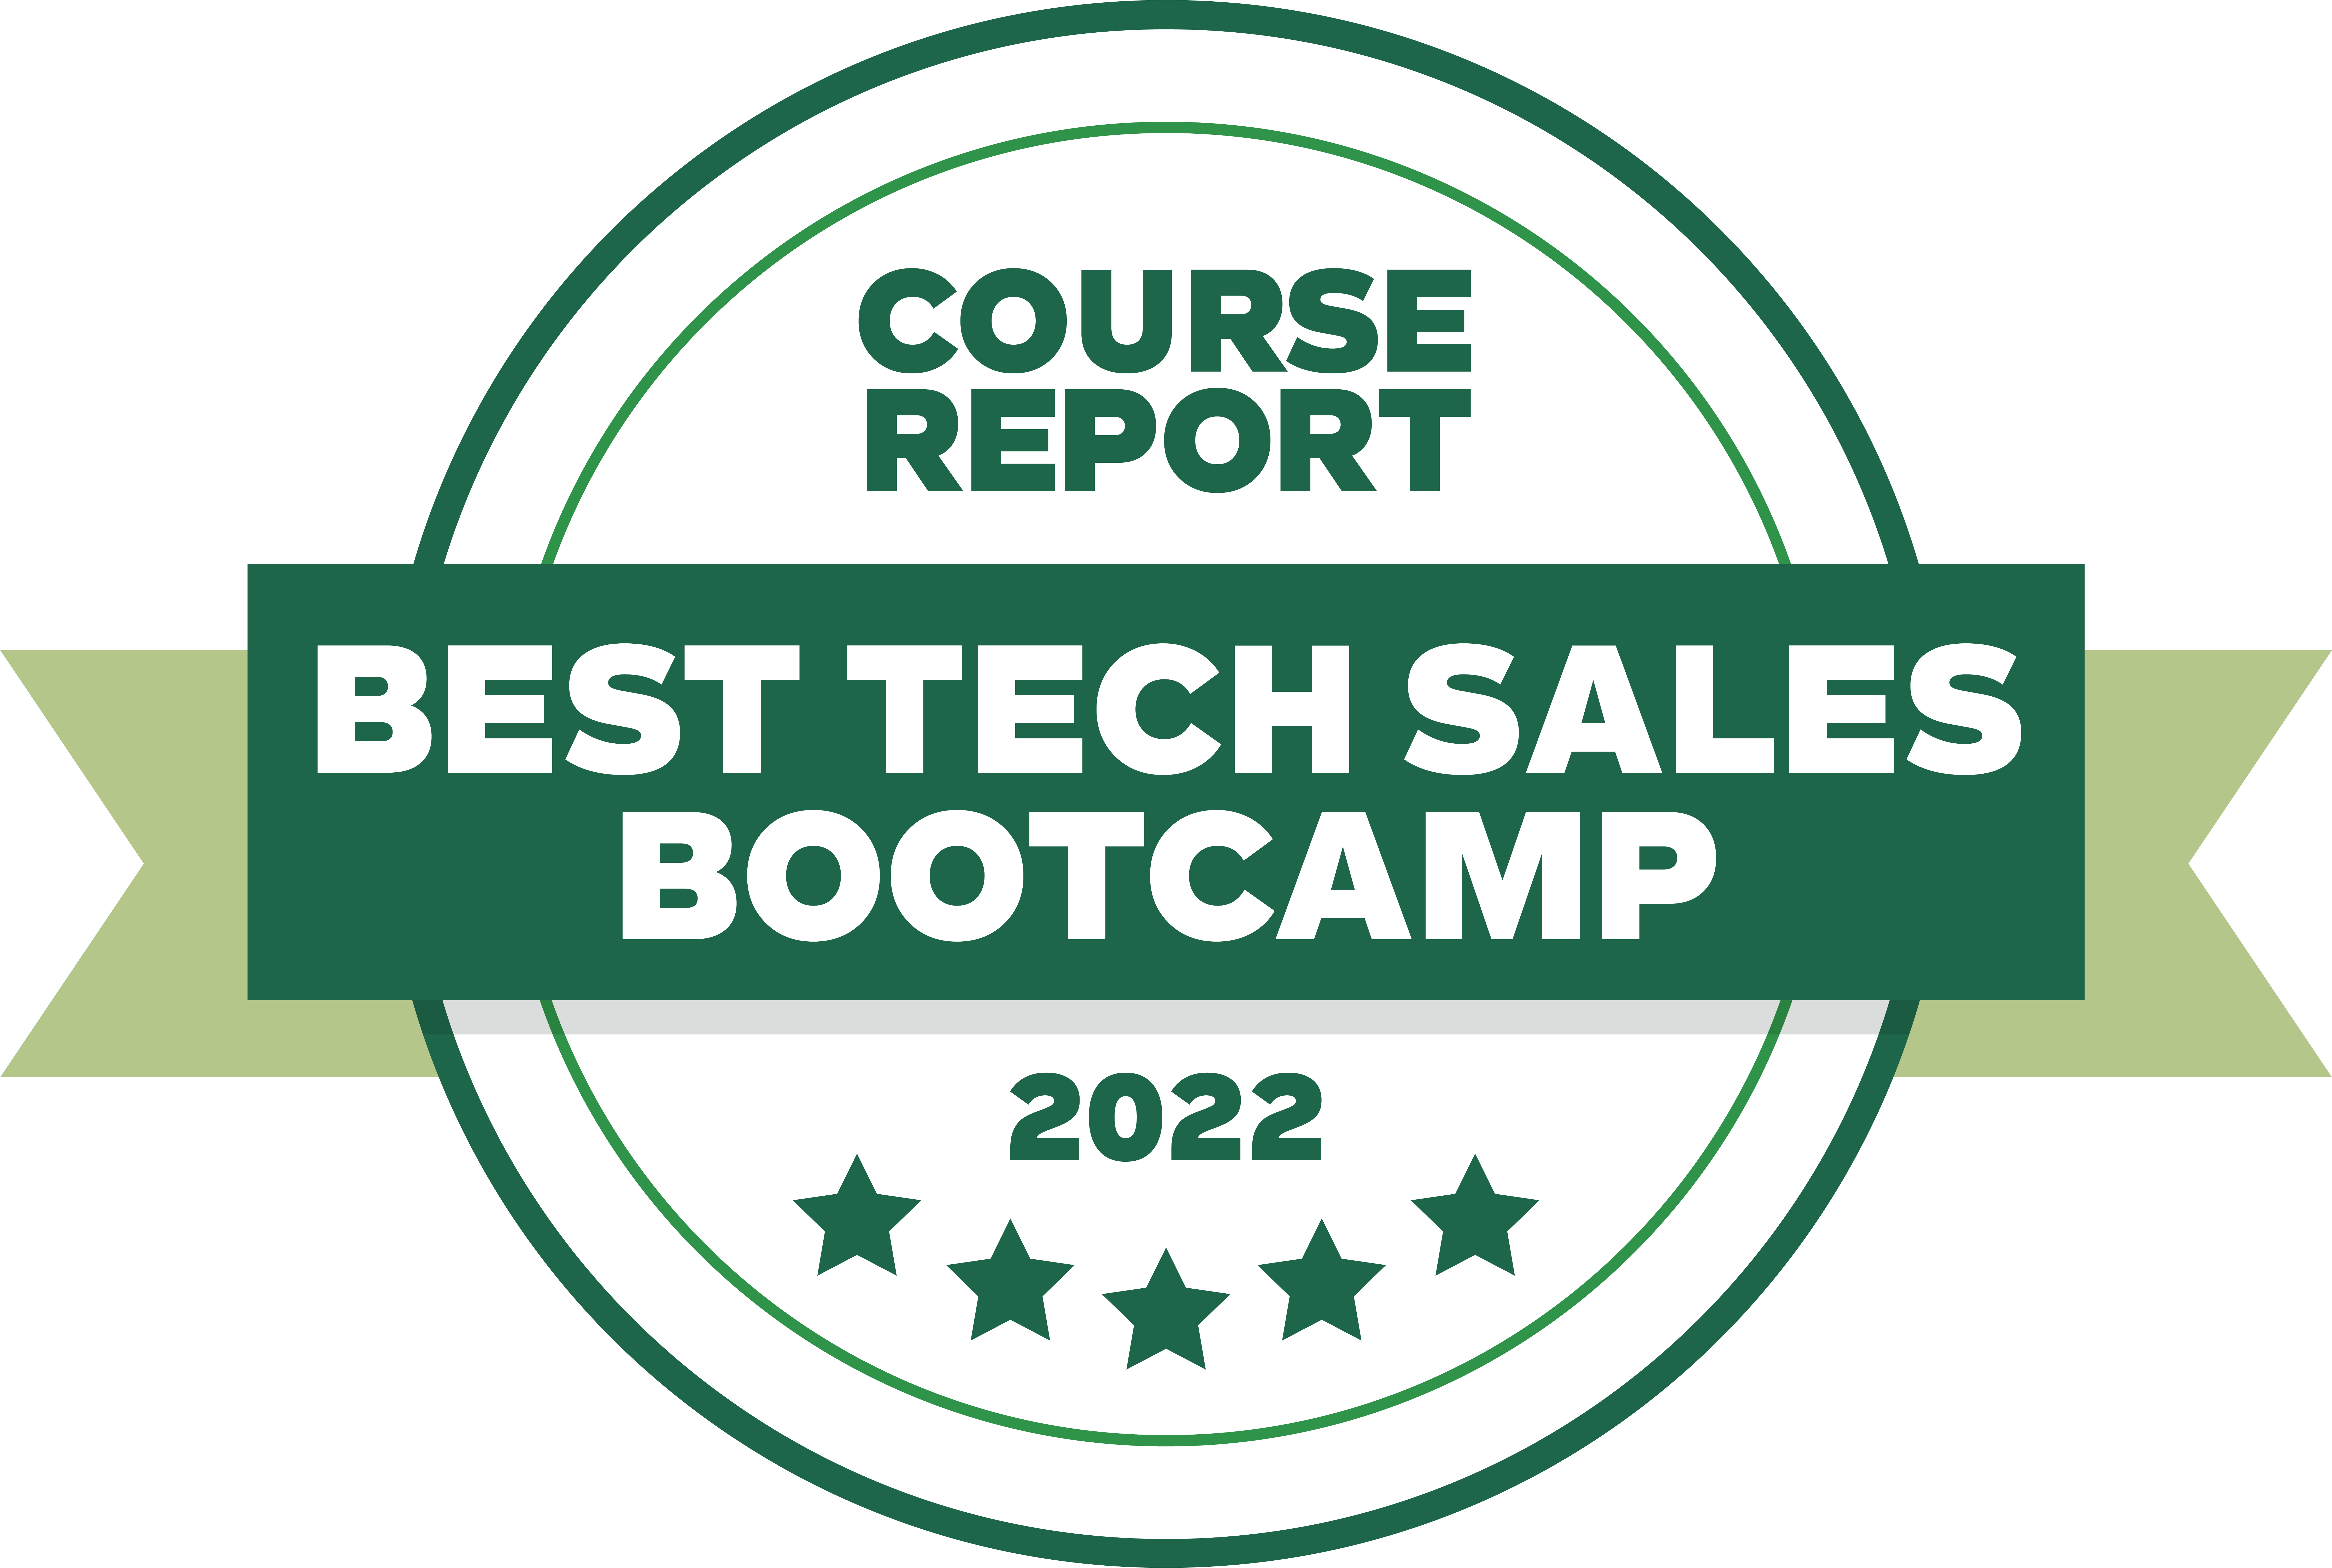 Top 13 Tech Sales Bootcamps